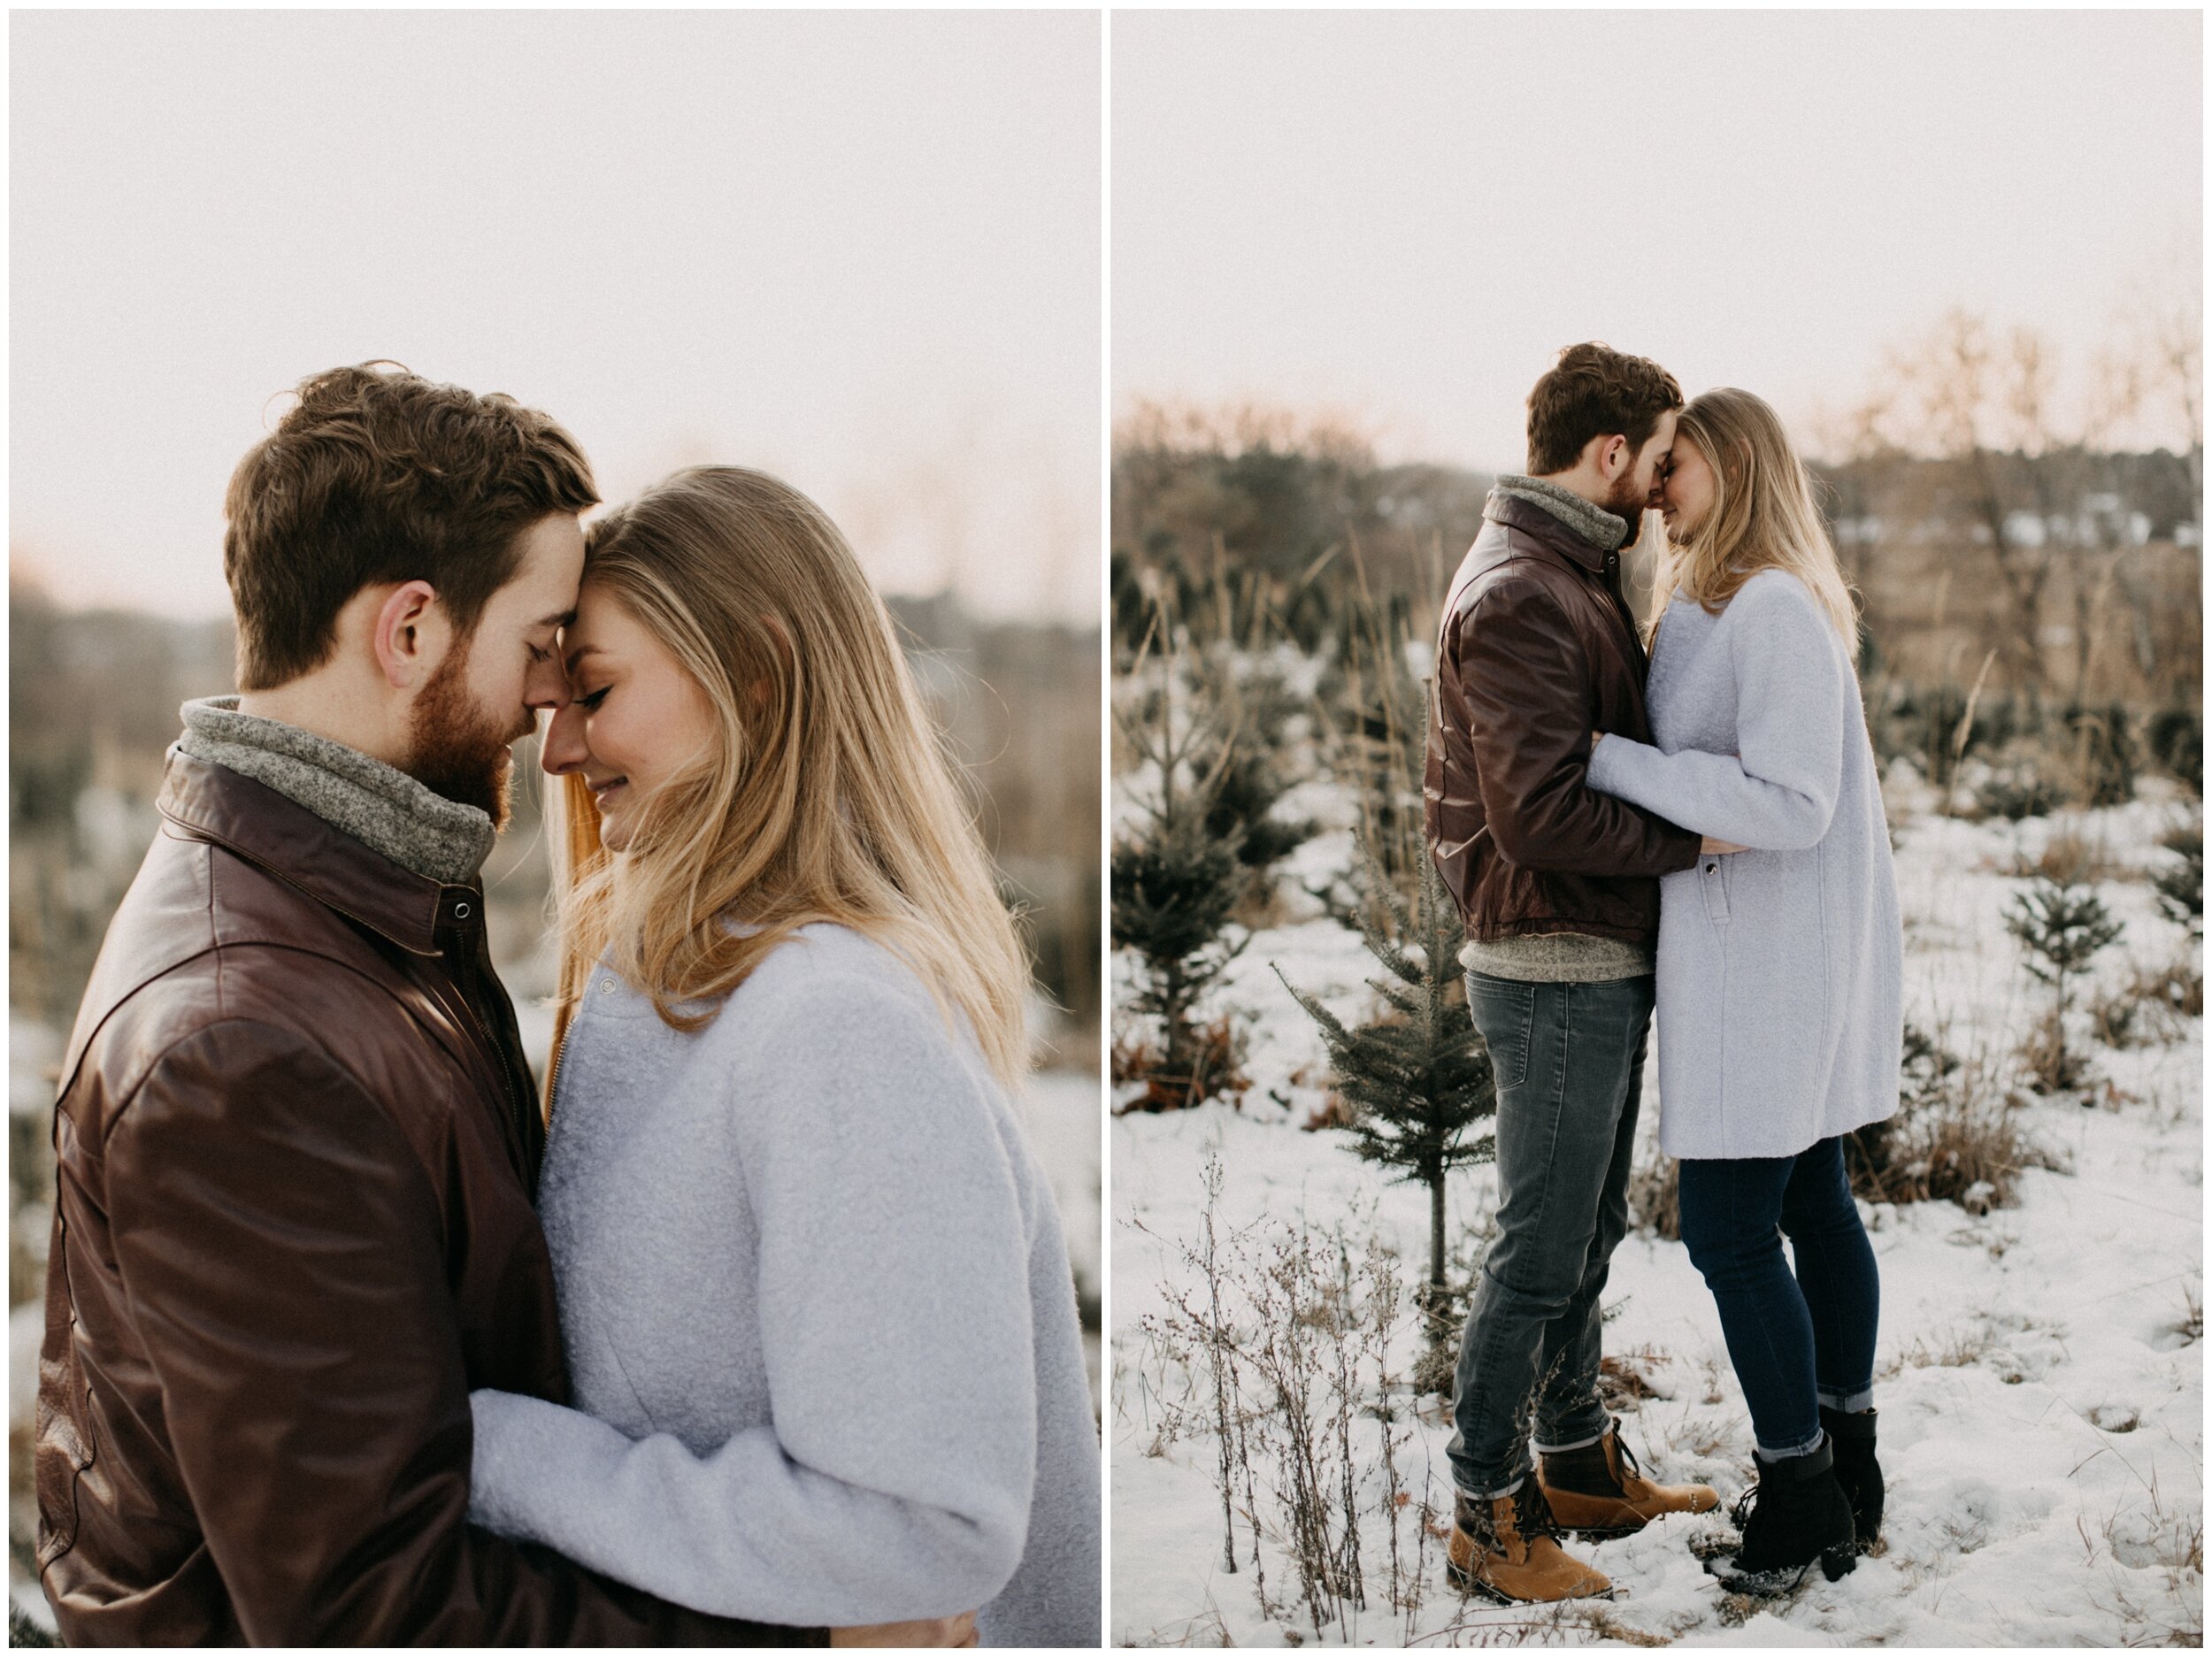 Couple touching foreheads while standing on snow covered ground during engagement session at Minnesota Christmas tree farm 